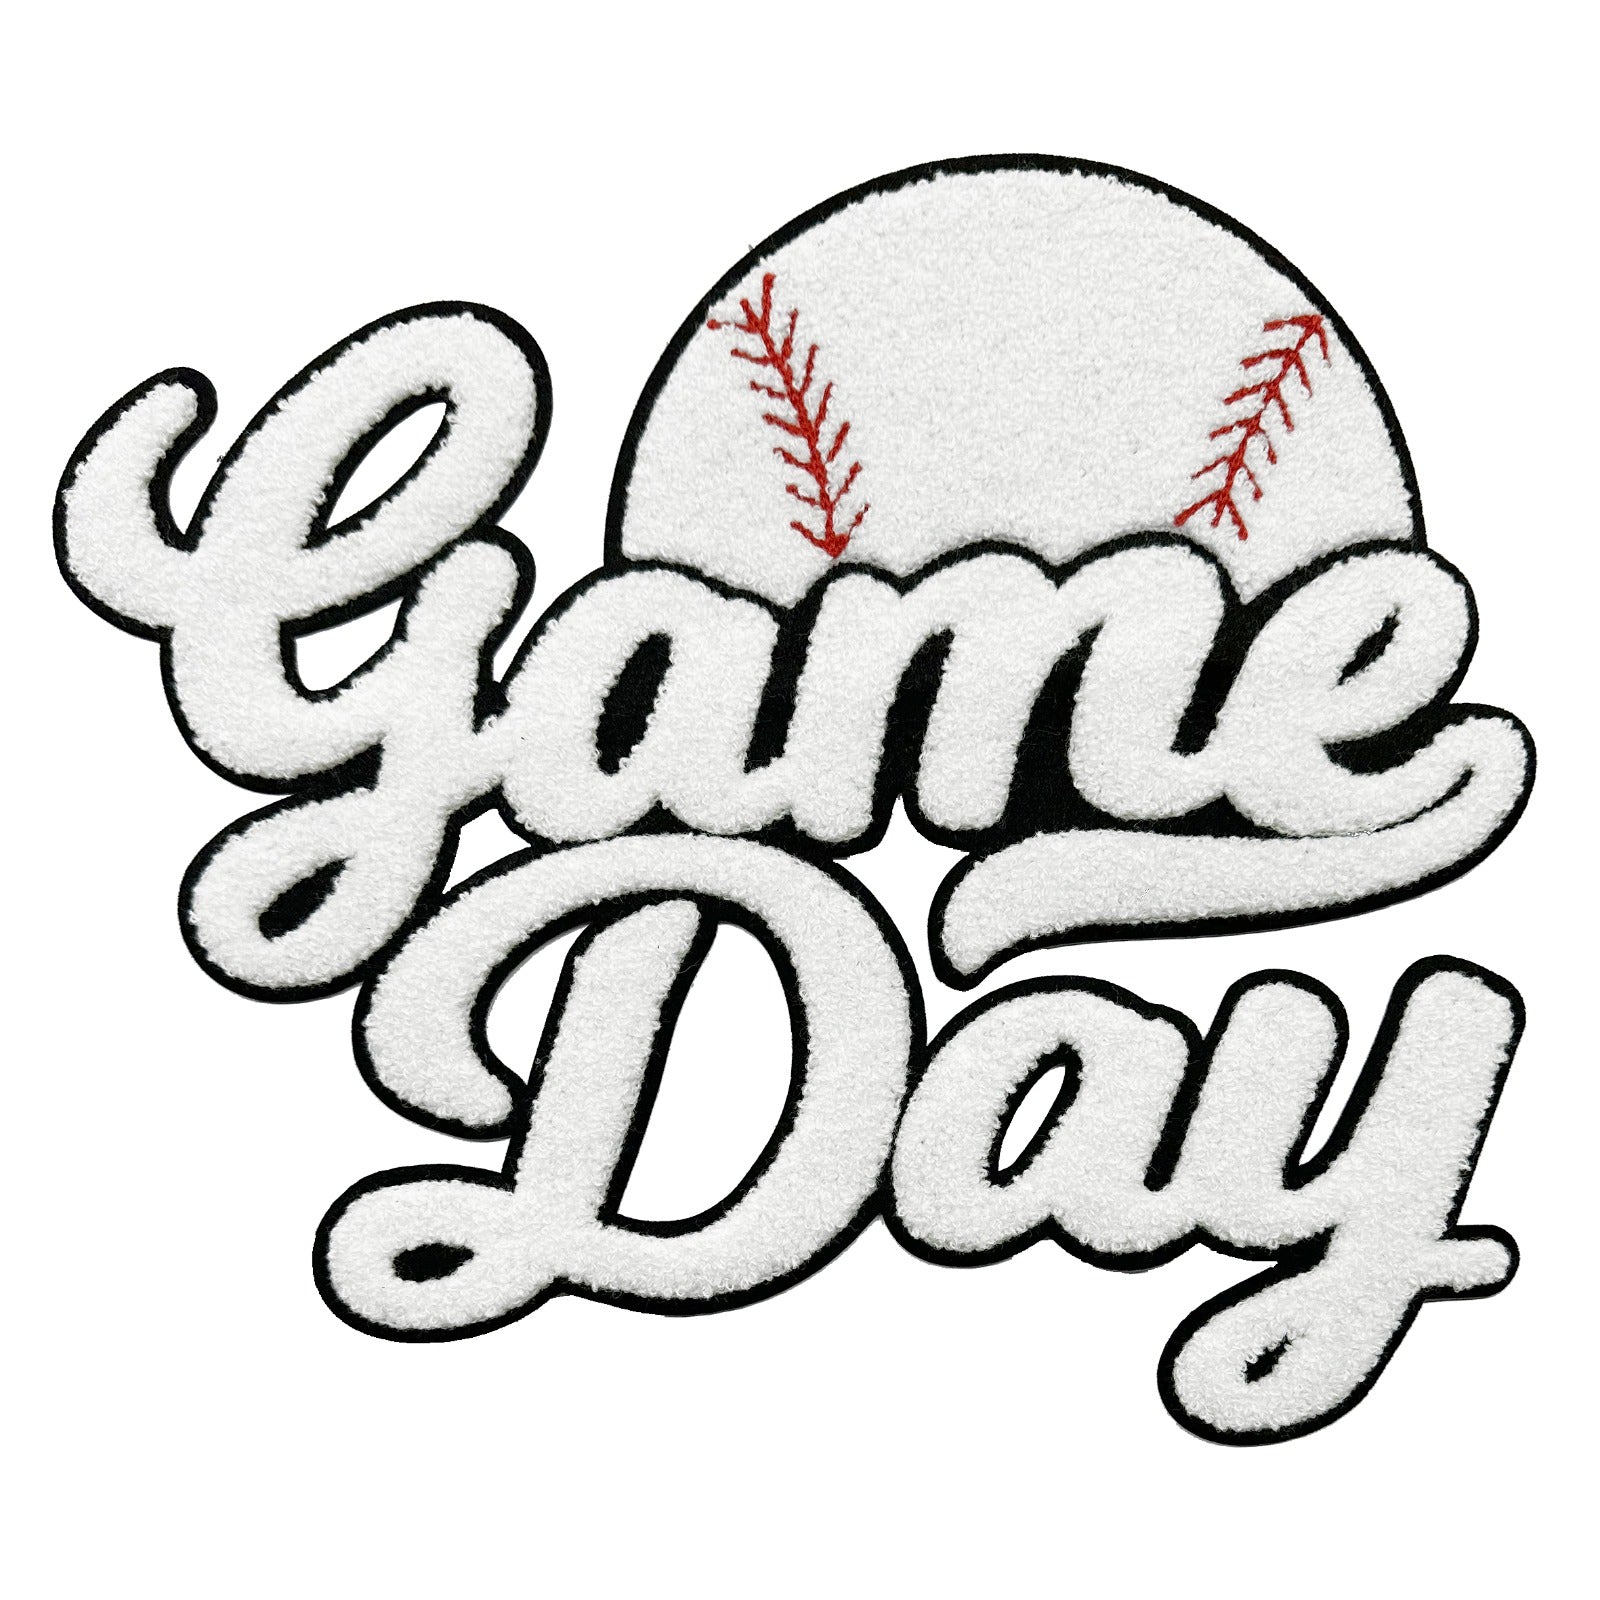 Game Day Baseball | Chenille Patch - PAT - 094